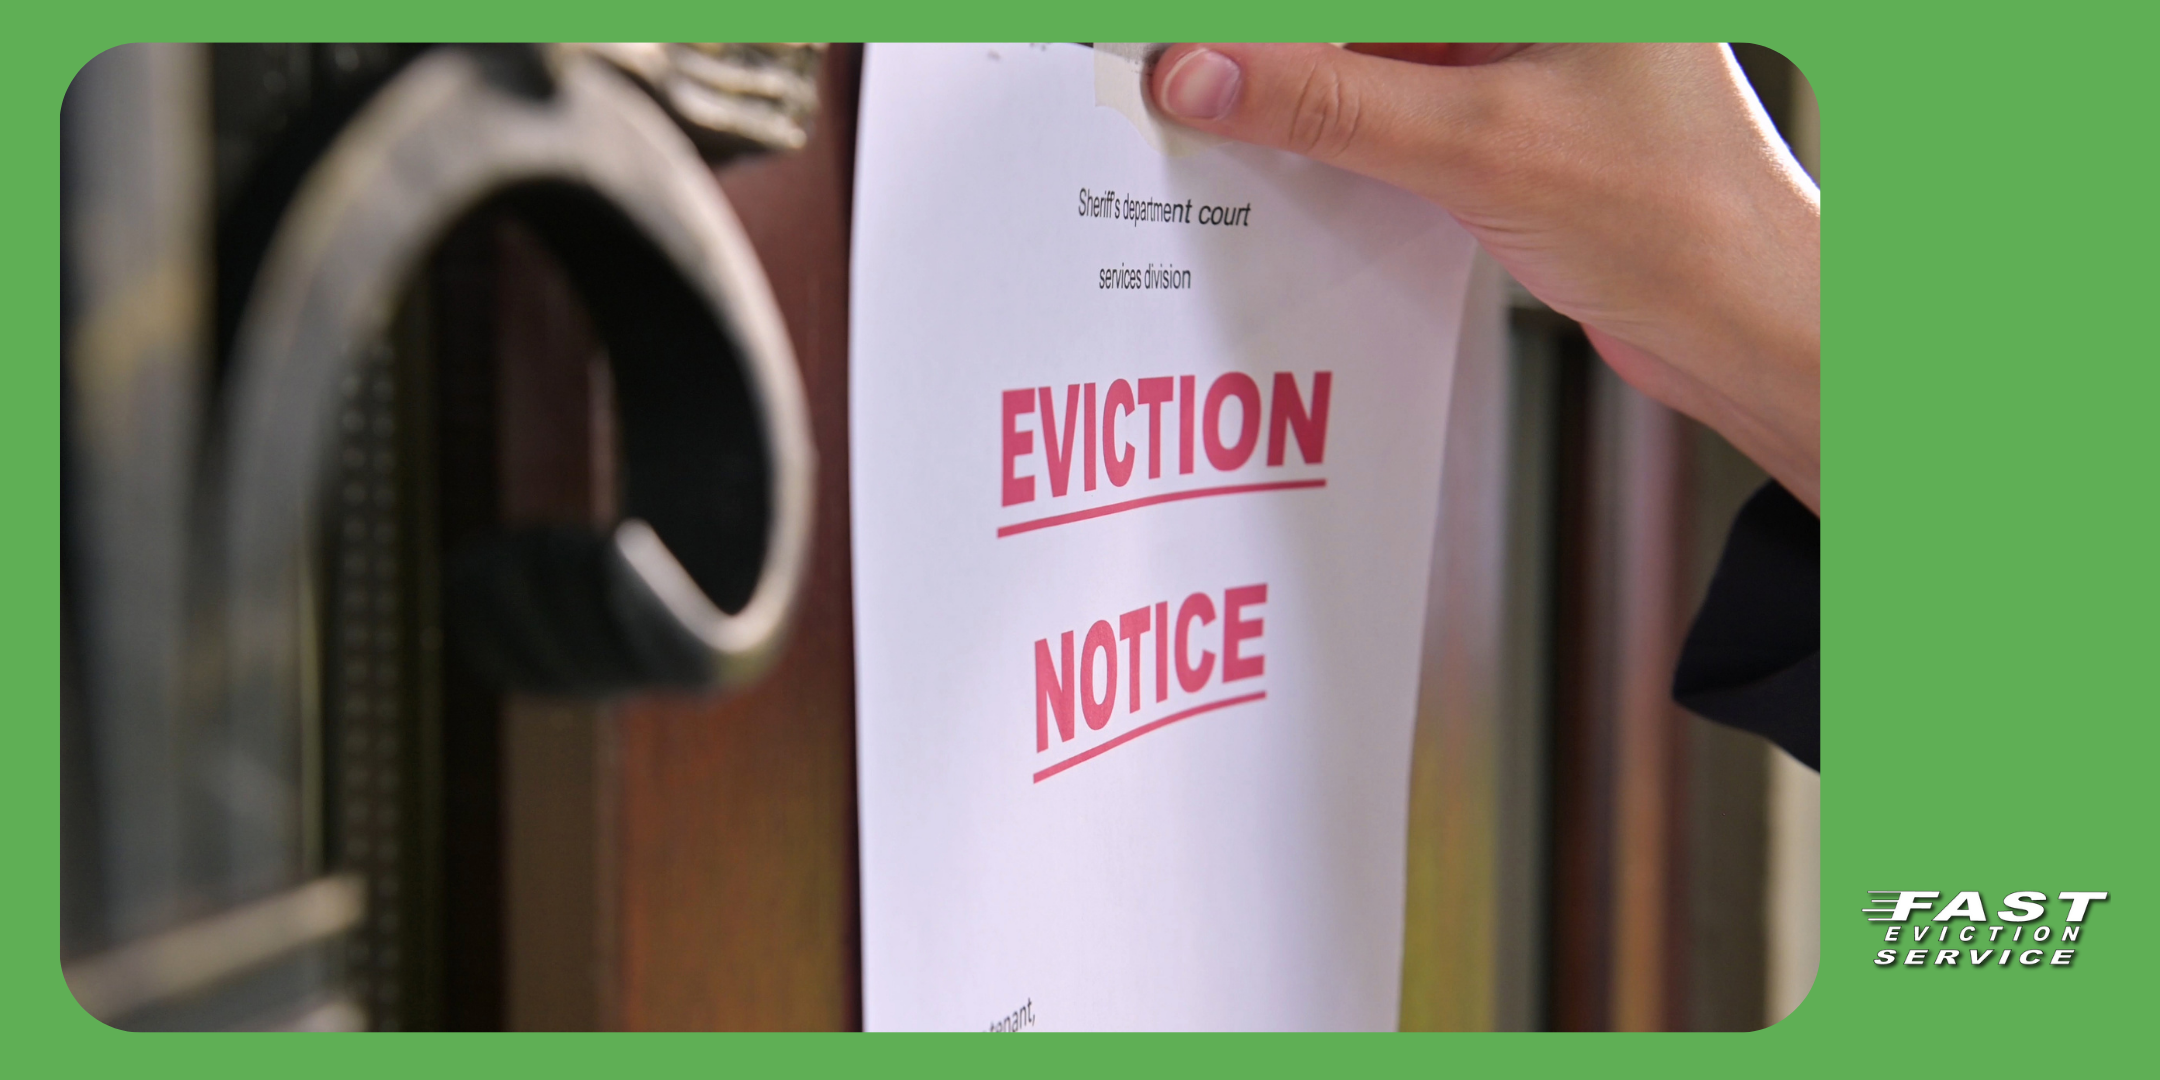 Can a Landlord Ask a Tenant to Vacate for No Reason?